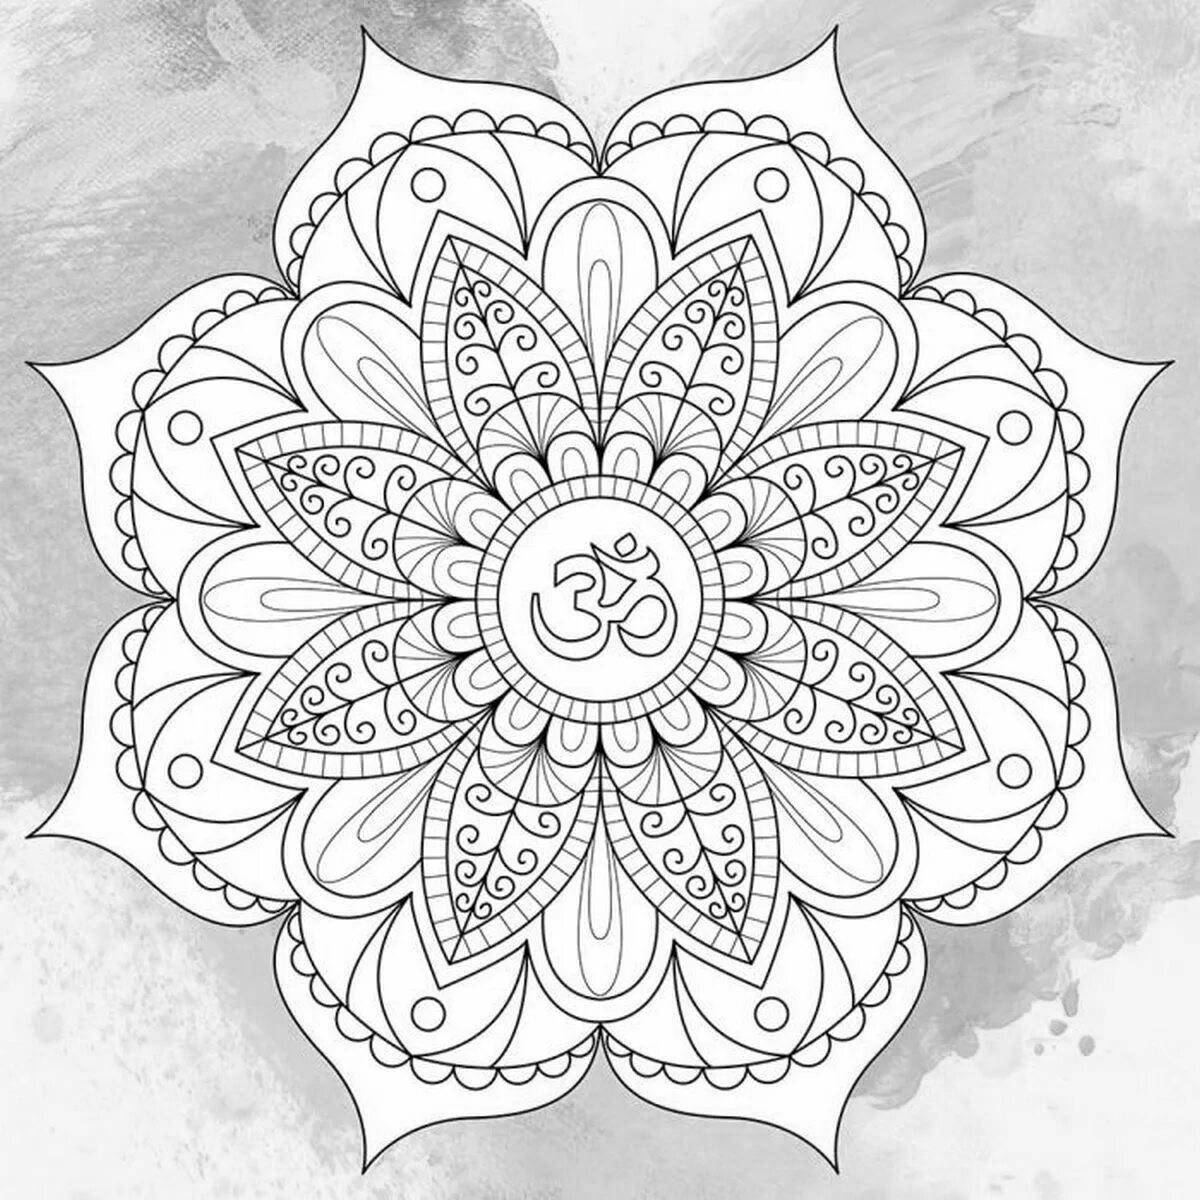 Peace coloring book for peace of mind